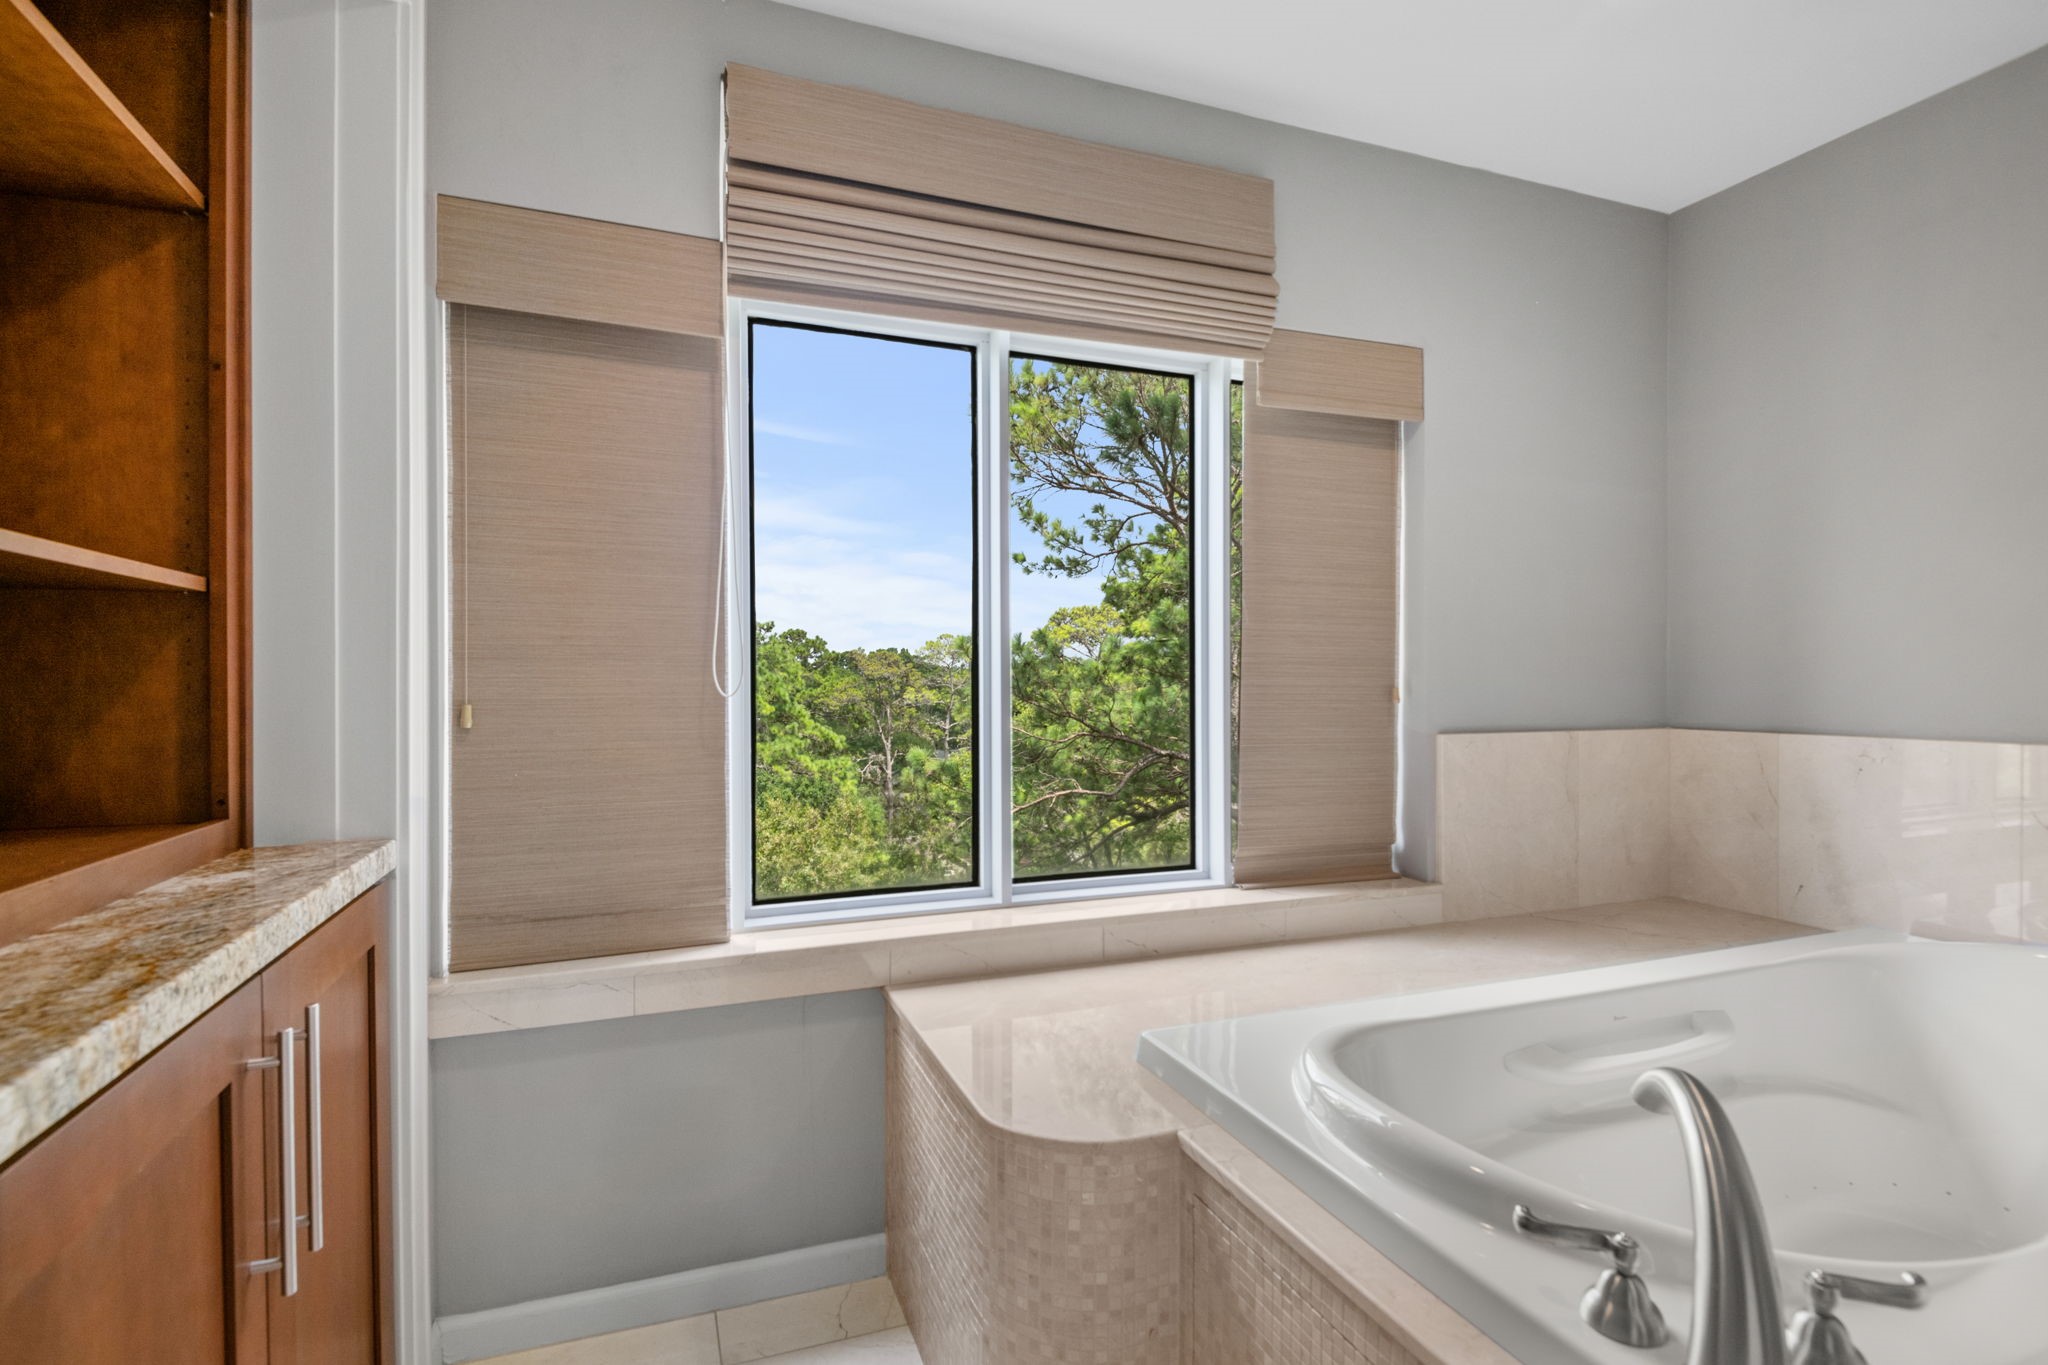 14x10 Primary Bathroom - 
Jetted tub with deck and a view. Built-in cabinetry for additional storage.